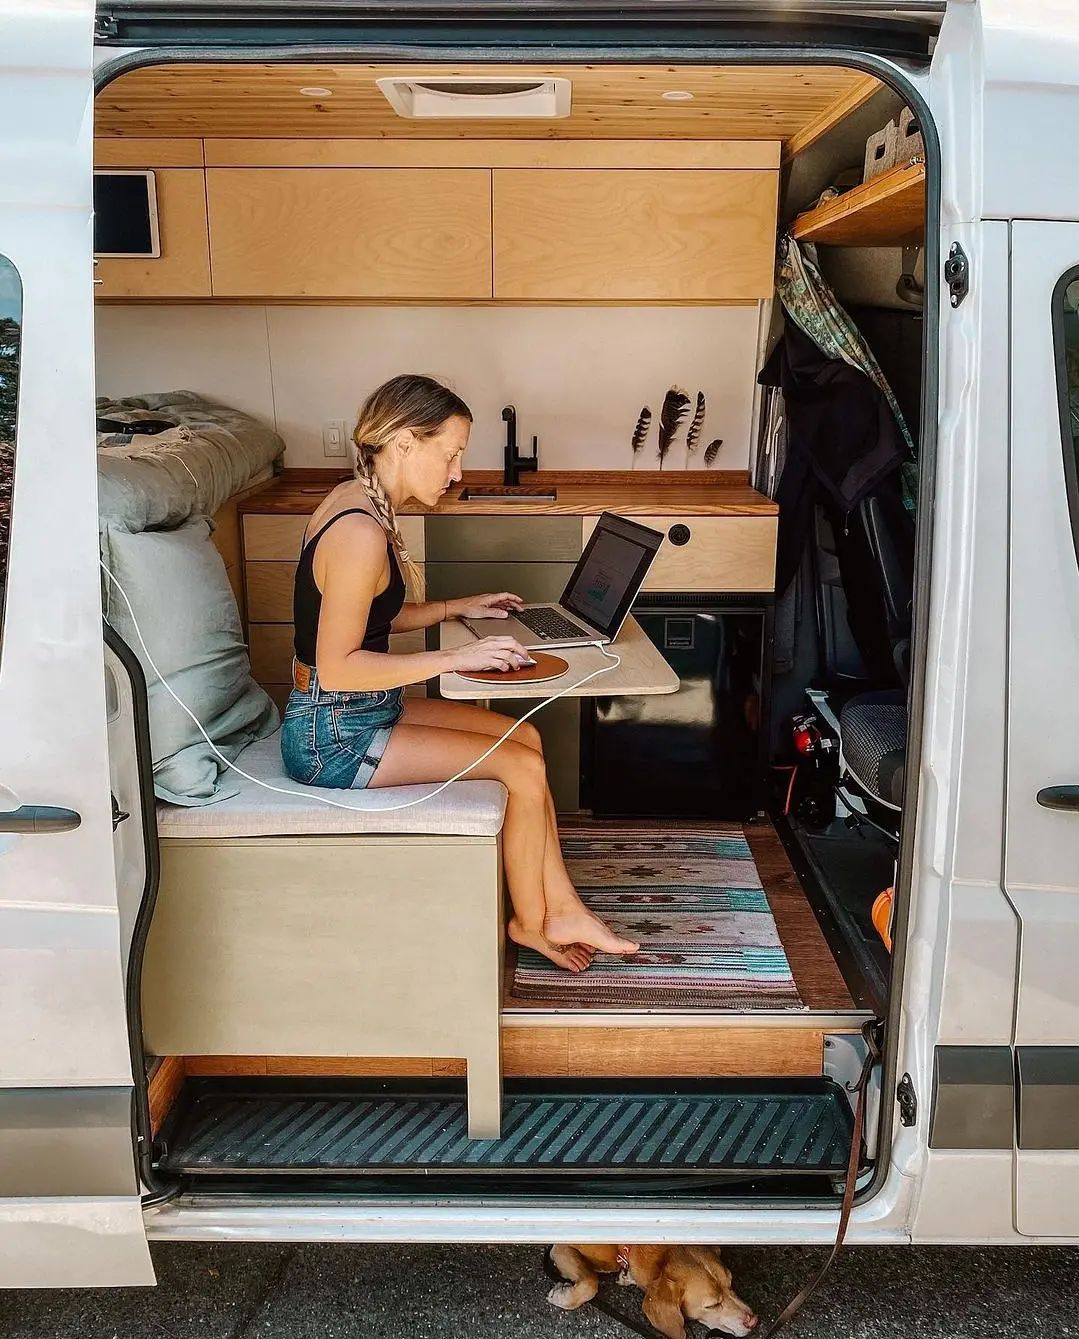 Vanoffice with the lagun table system! Modern. Simple. Flexible.P.S. The doggies would also love the table as soon as you start having dinner 😁😉Thanks for the photo @egret.the.van#vanlife #vanconversion #outdooroffice #camperoffice #vanlifestyle #traveloffice #campingtable #campingtisch #laguntable #laguntableleg #laguntisch #laguntischgestell